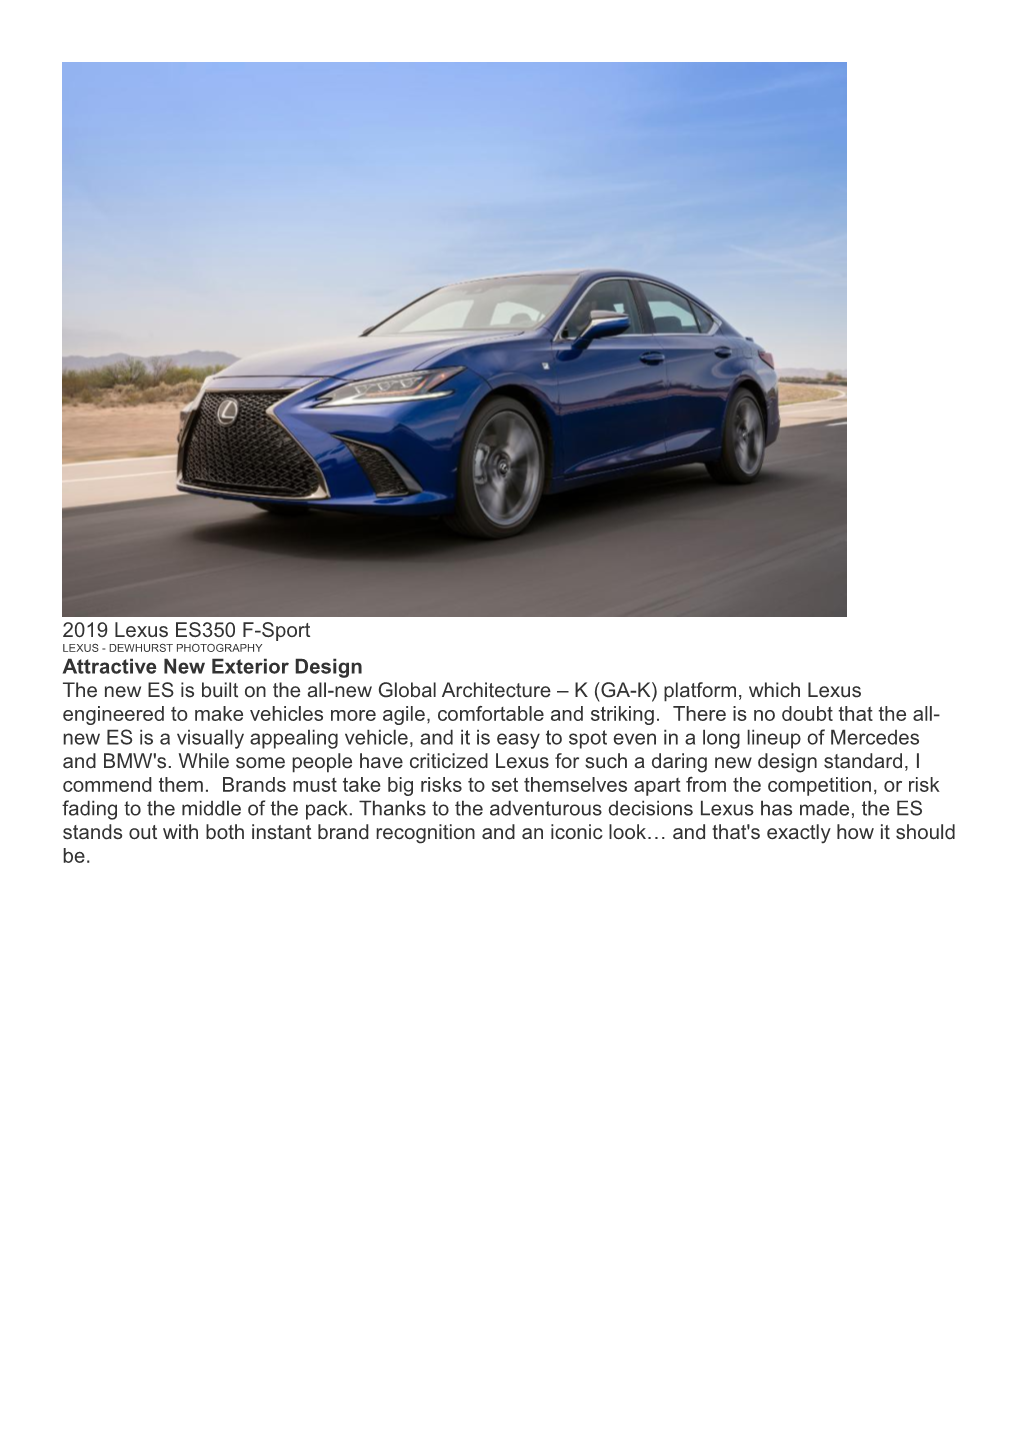 2019 Lexus ES 350 F-Sport - 3 Things You Need to Know